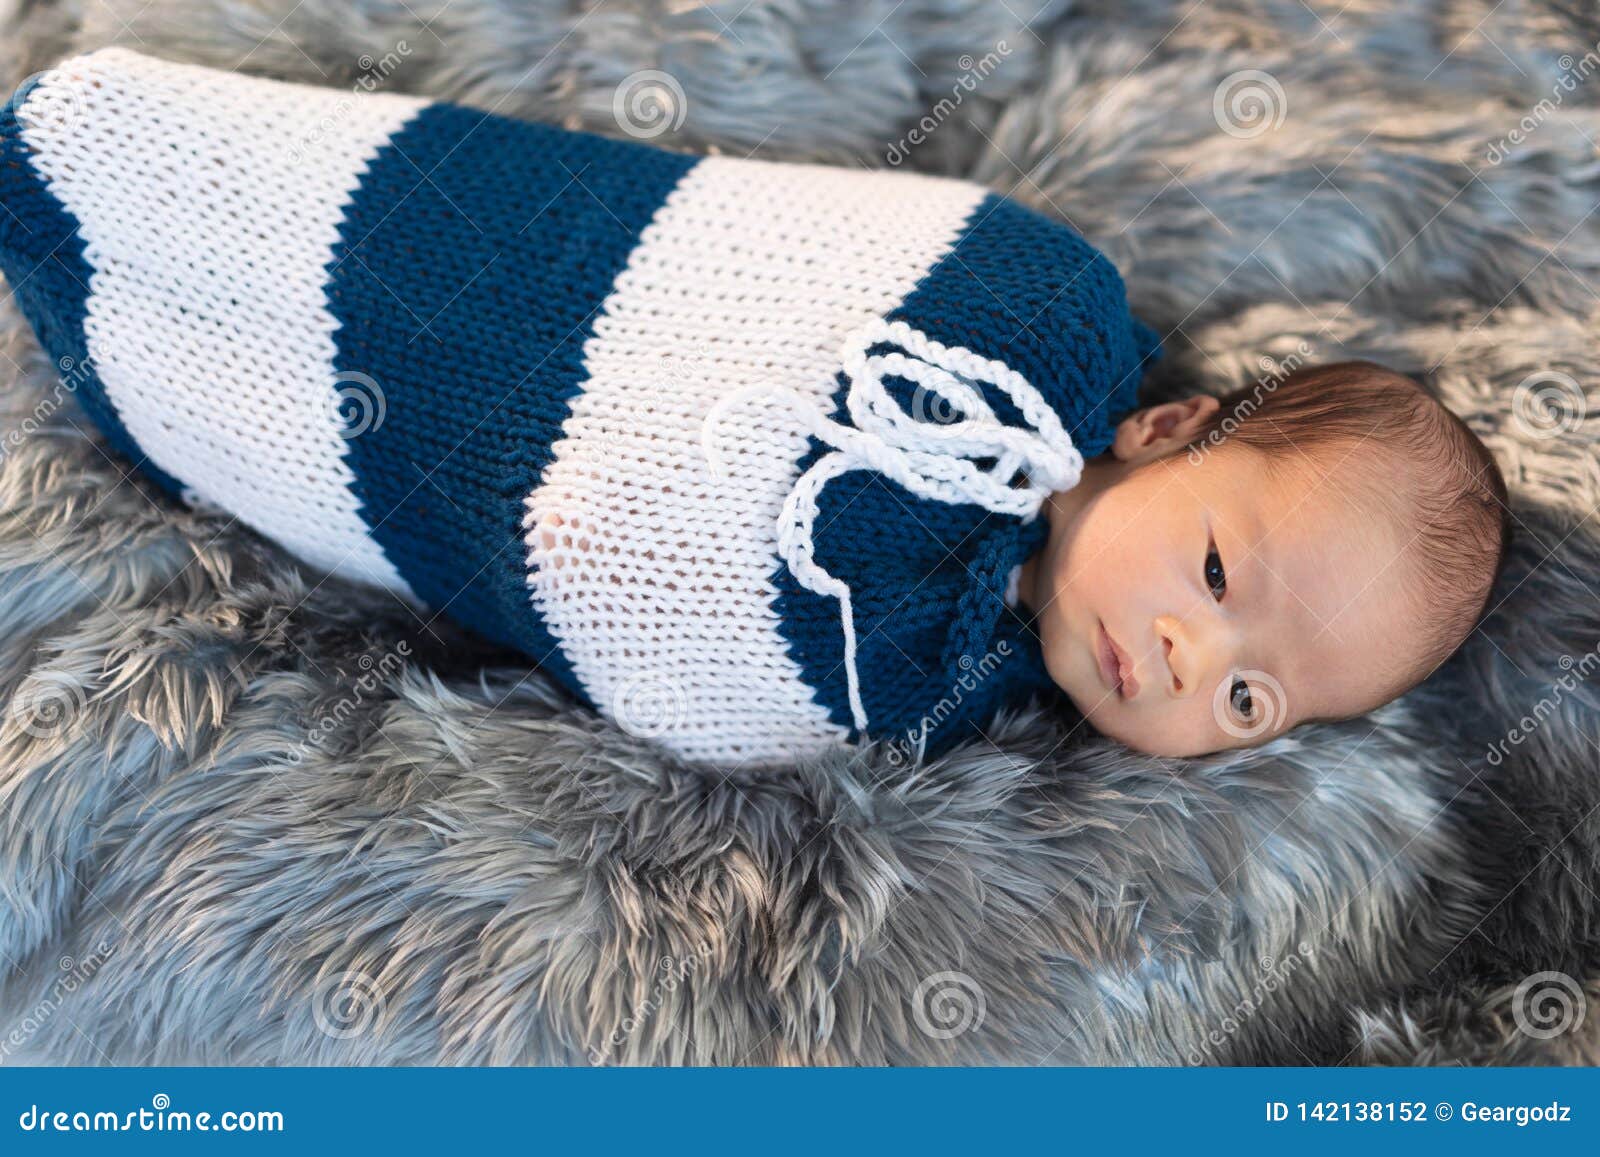 Newborn Baby Boy Swaddled In A Knit Wrap On Fur Bed Stock Photo Image